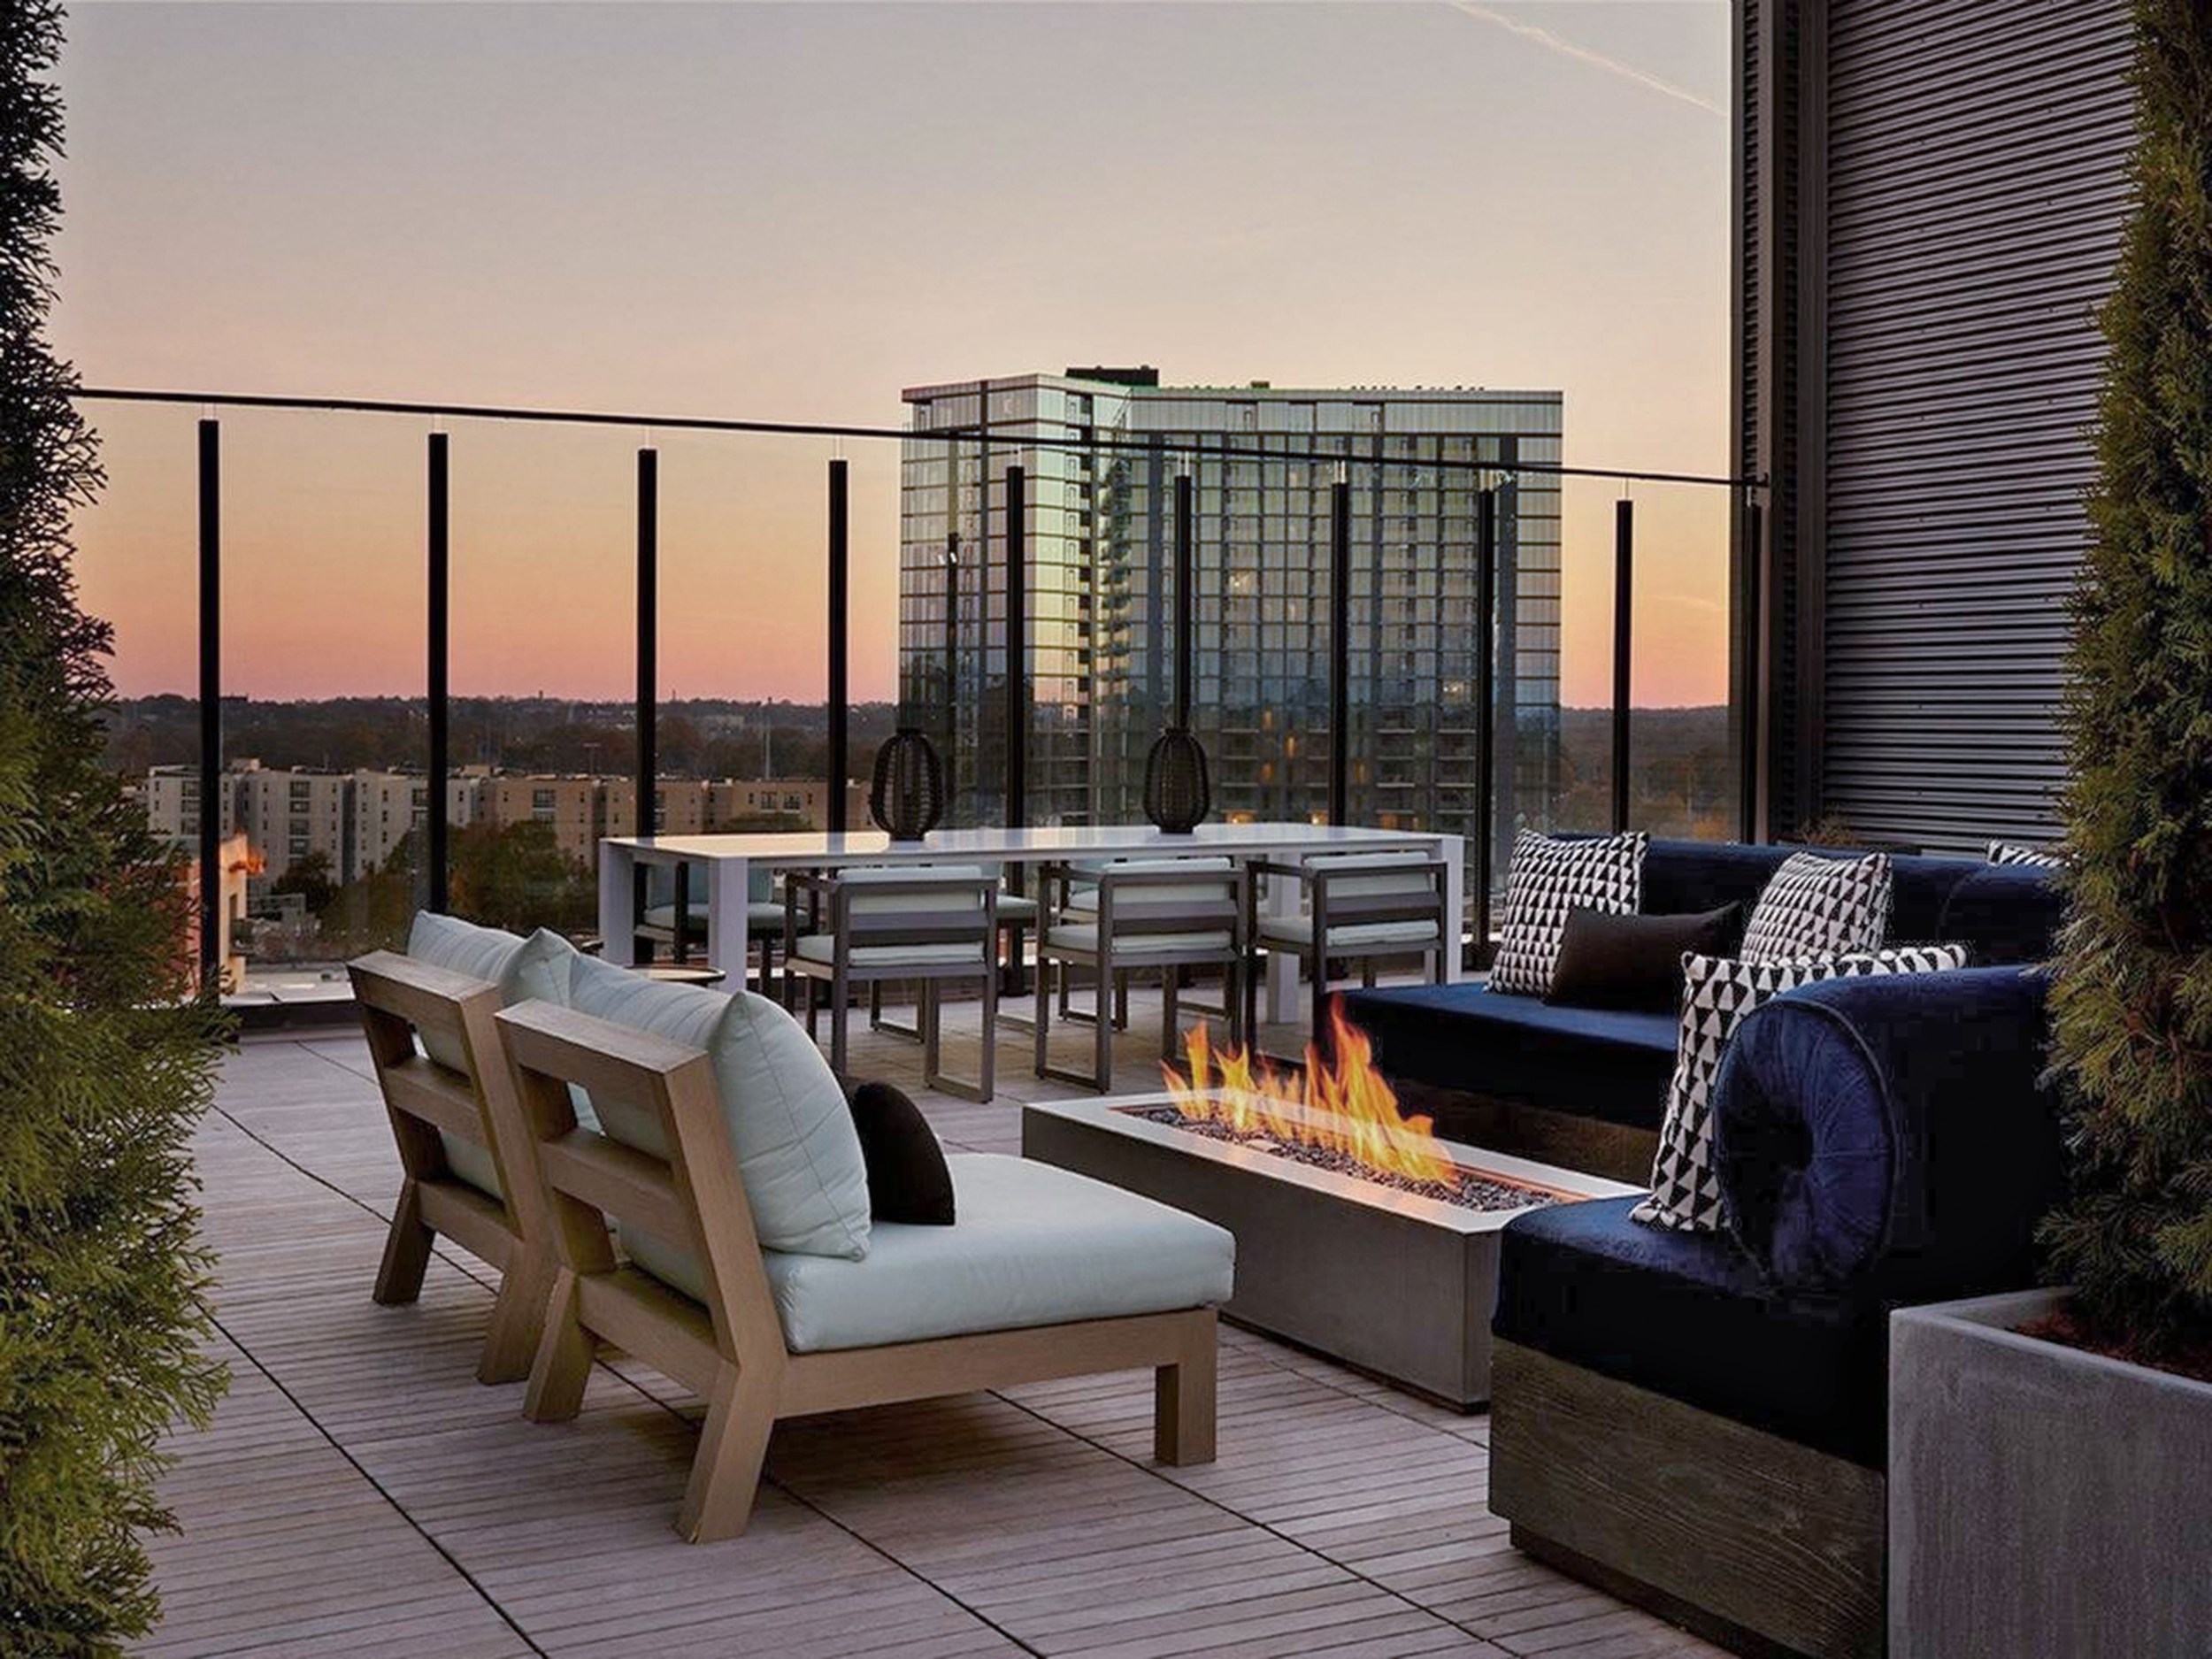 Apartment rooftop deck with seating around a fire pit and a view of a big building in the distance.